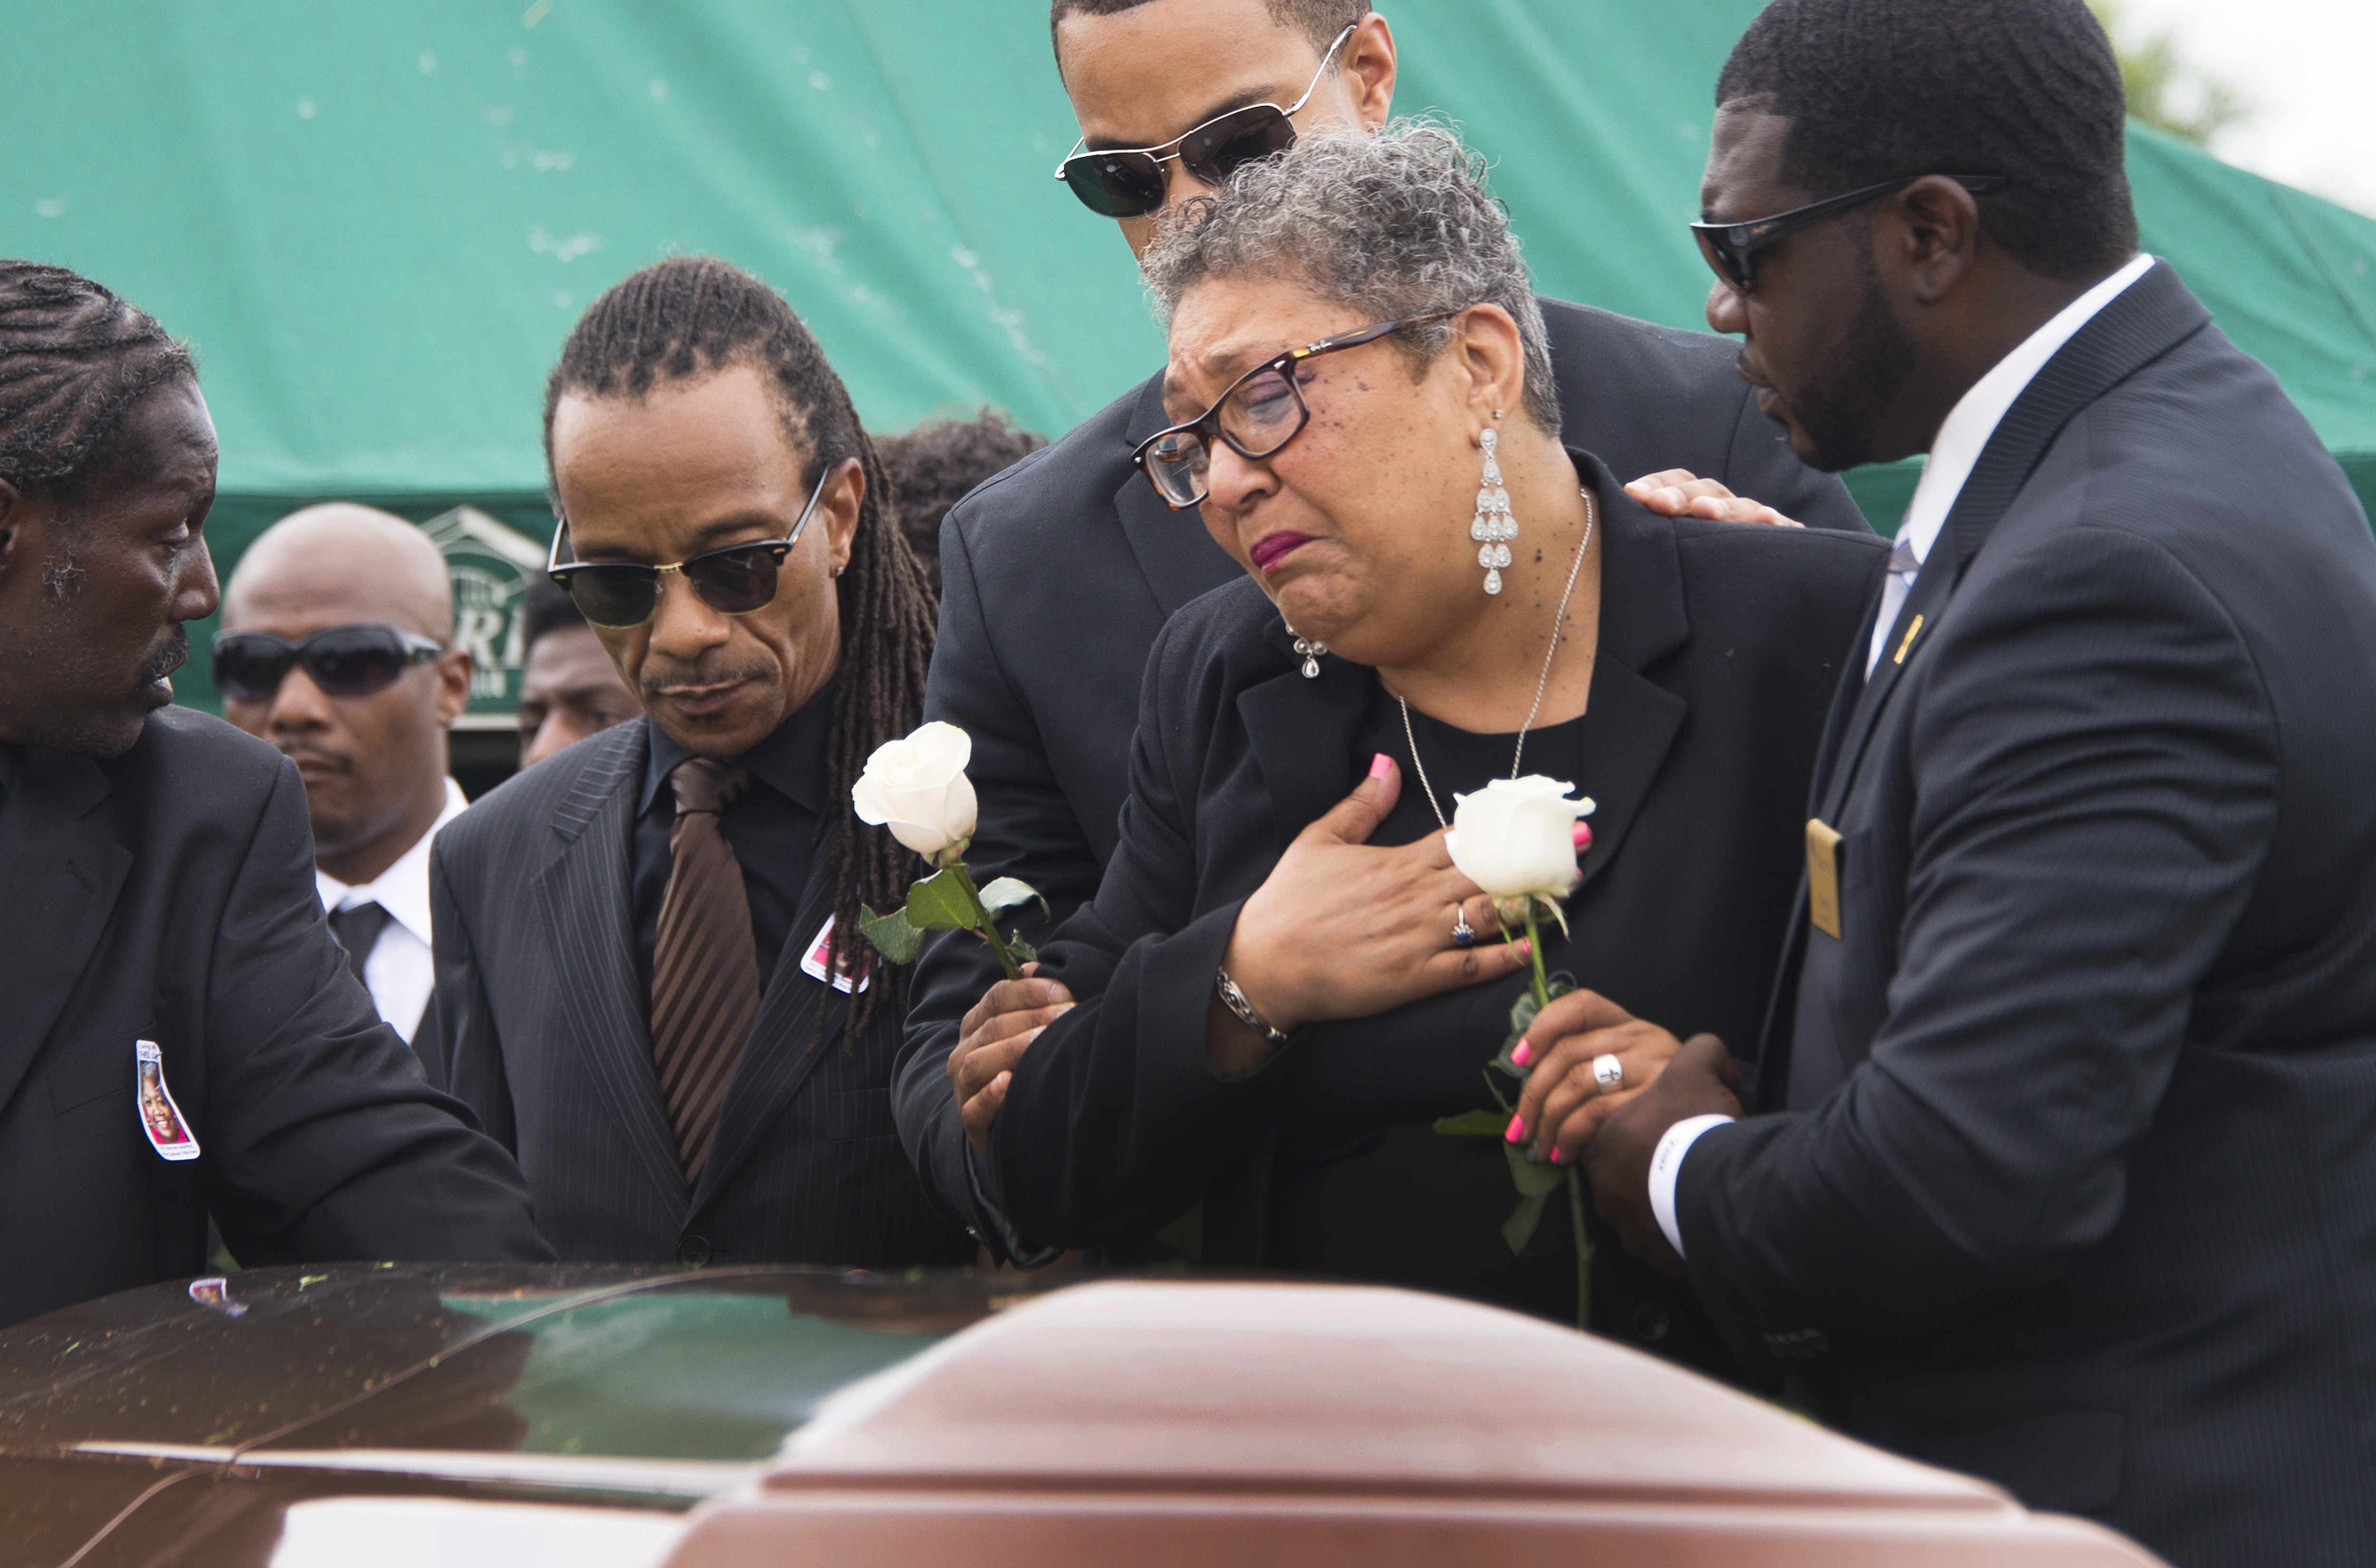 Sharon Risher and son Gary L Washington say their goodbyes to Ethel Lance during her burial at the Emanuel AME Church Cemetery in Charleston, South Carolina, on 25 June, 2015